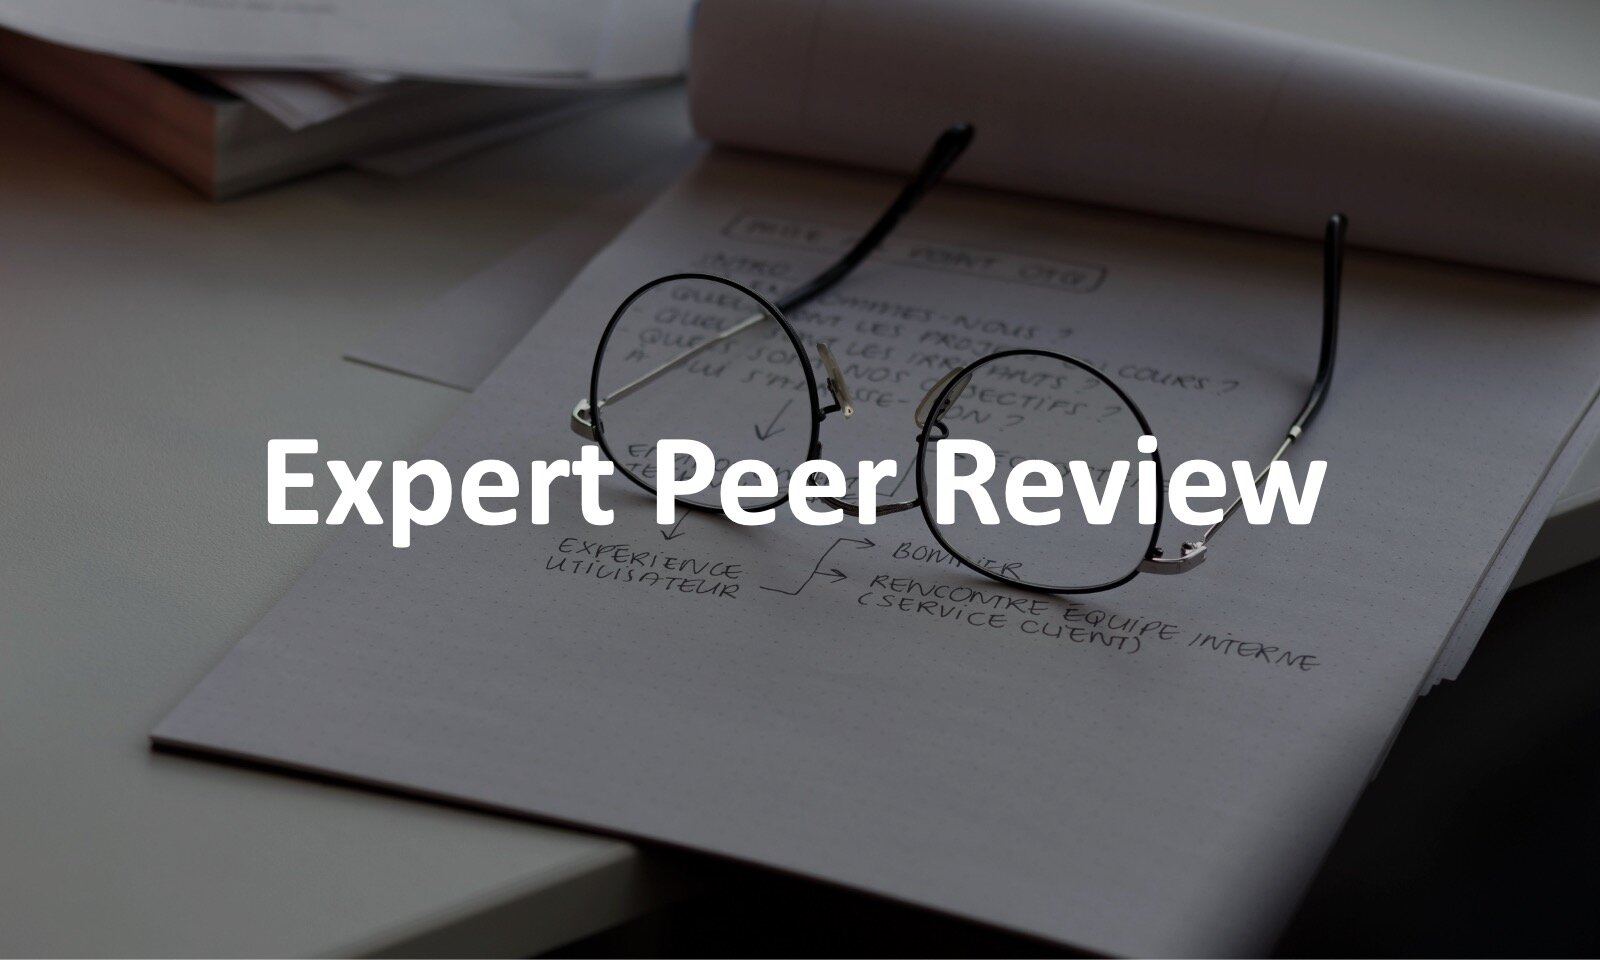  Vireo provides expert, third-party review services. We can provide a detailed, thorough, and objective review of safety studies, methods, dossiers, claims and reports. 